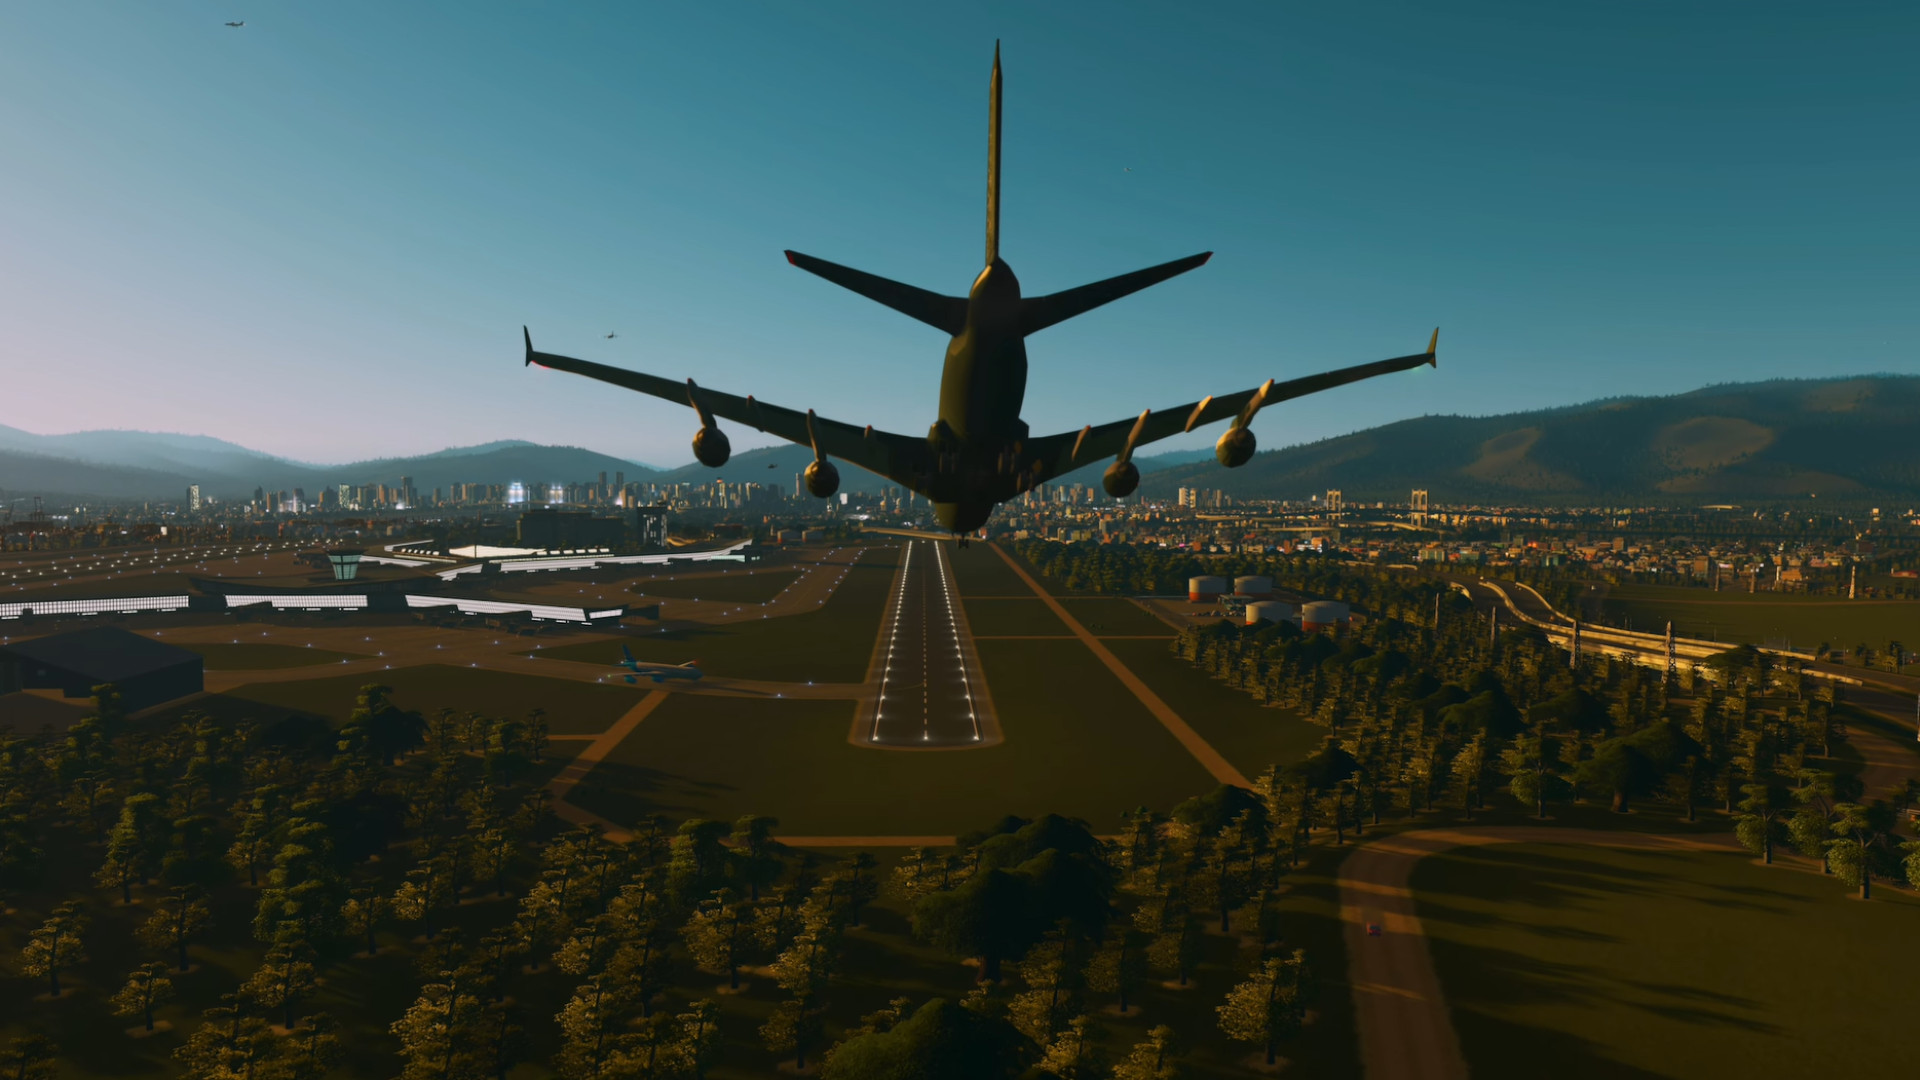 Cities: Skylines' Airports DLC brings air travel to the city-building game